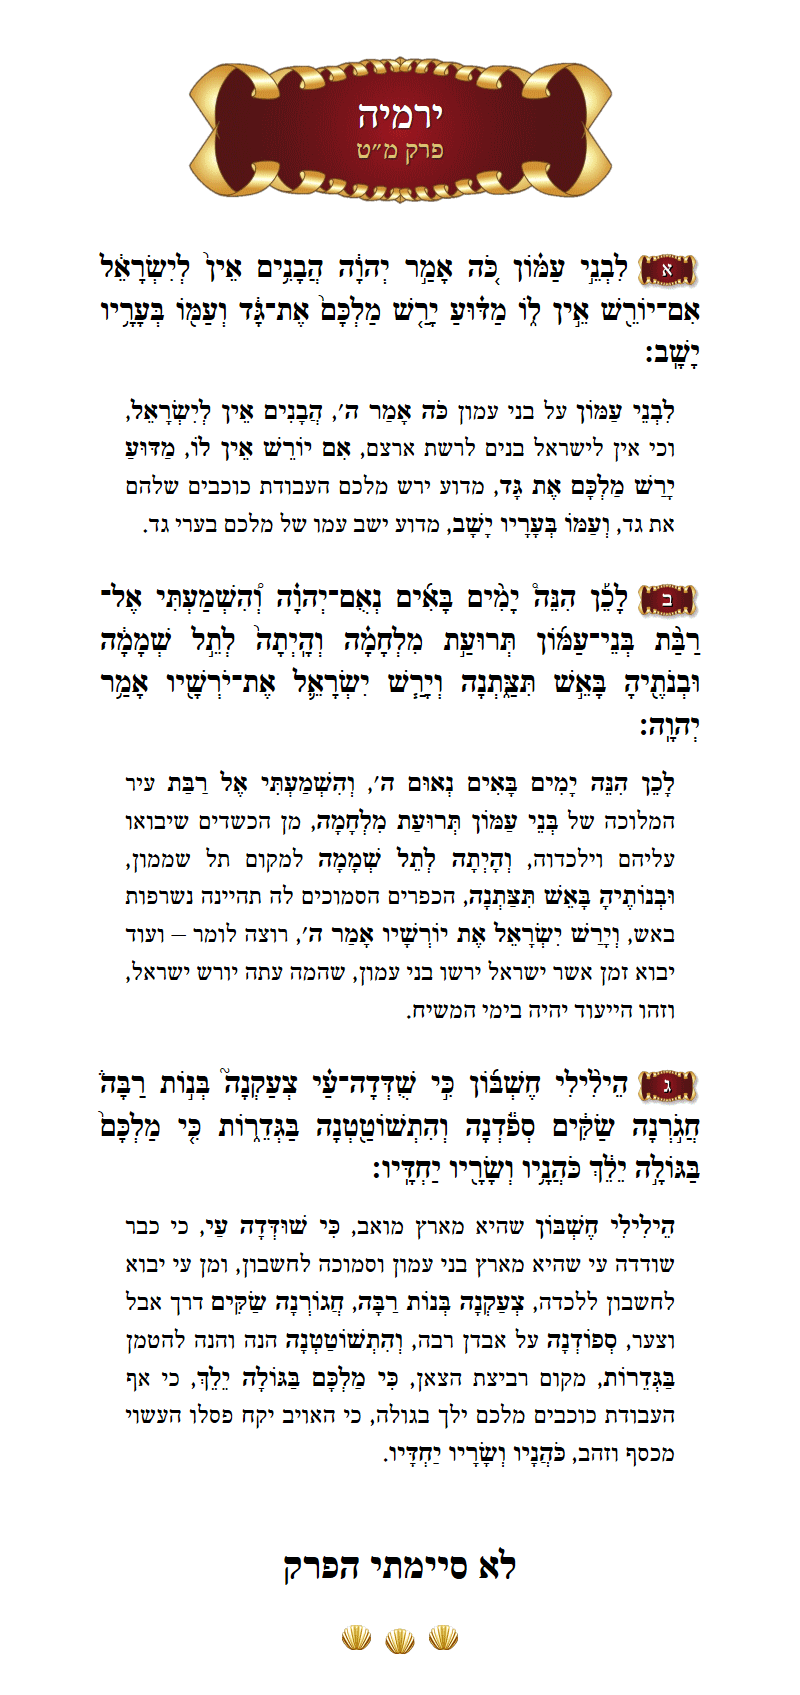 Sefer Yirmeyohu Chapter 49 with commentary